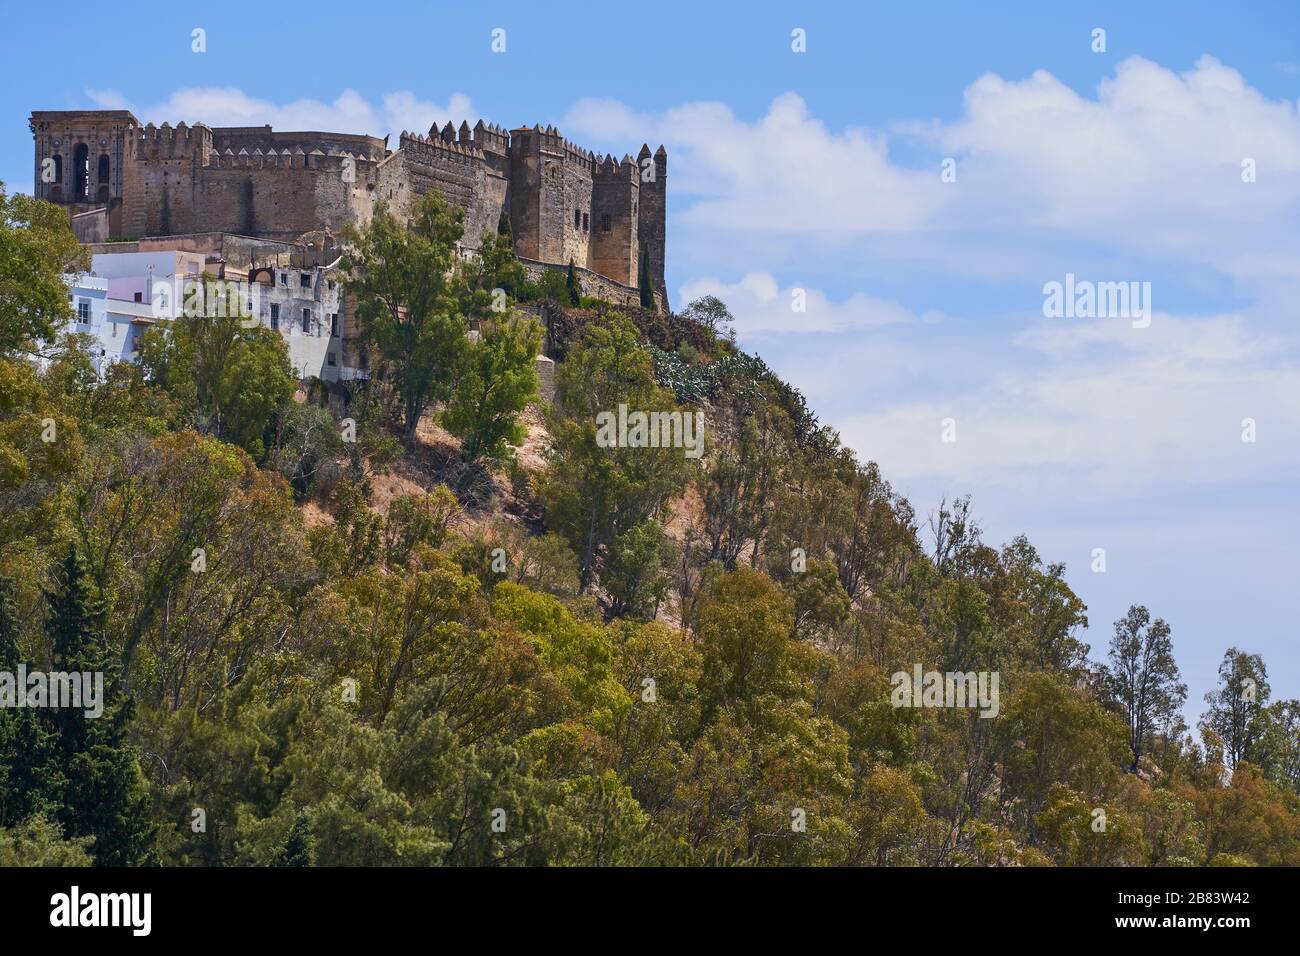 The castle and chuch tower of historic white village Arcos de la Frontera, Province of Cadiz, Andalusia (Andalucia) on top of the hill. Spain. Europe Stock Photo